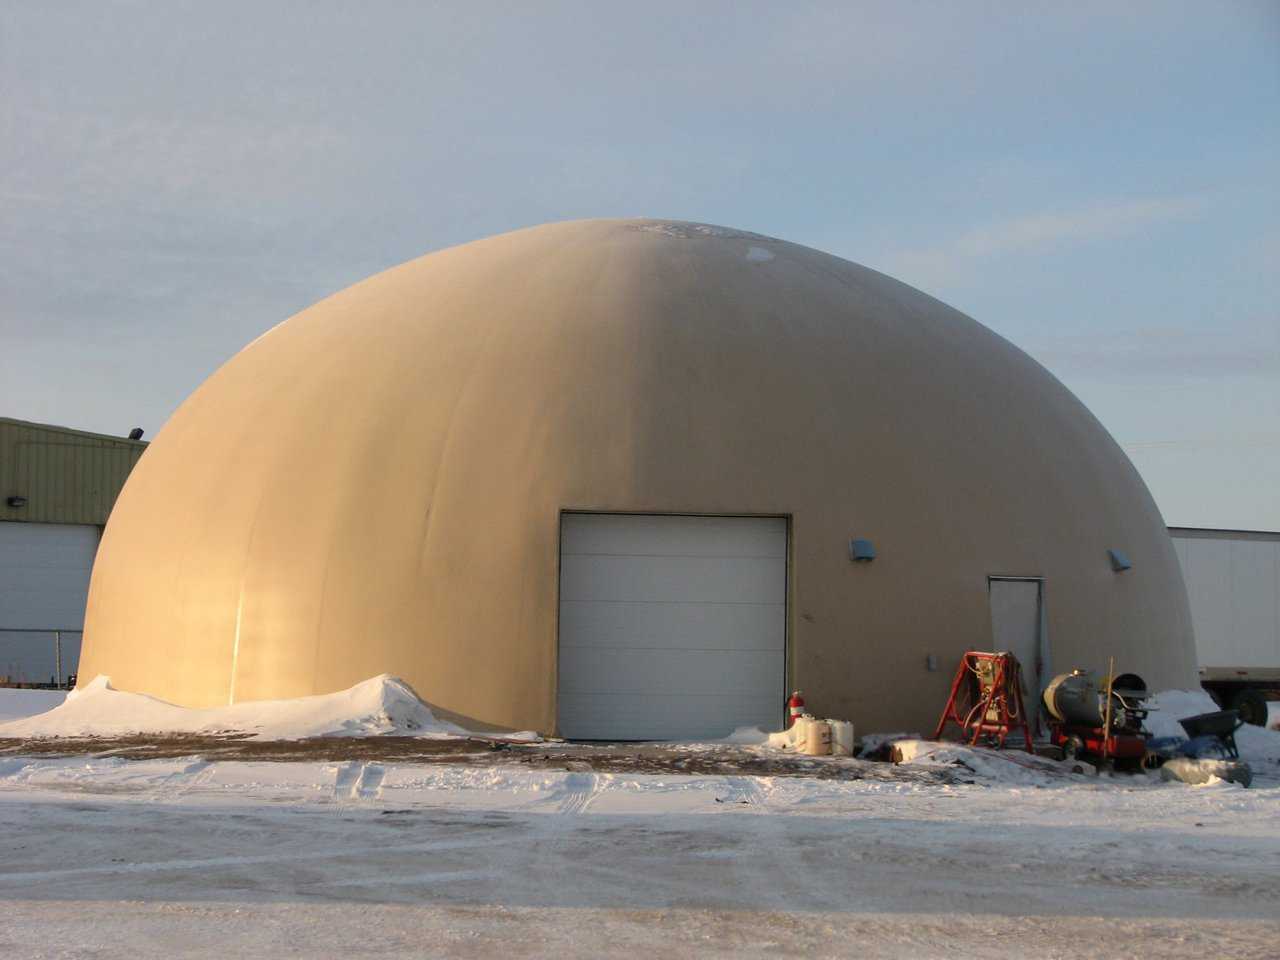 Heated Monolithic Dome Shop — This first picture is of a heated Monolithic Dome Shop in Saskatchewan, Canada. The picture was taken at 25 degrees below zero. It is a standard color photograph taken by a standard camera. Note the metal buildings in the background.